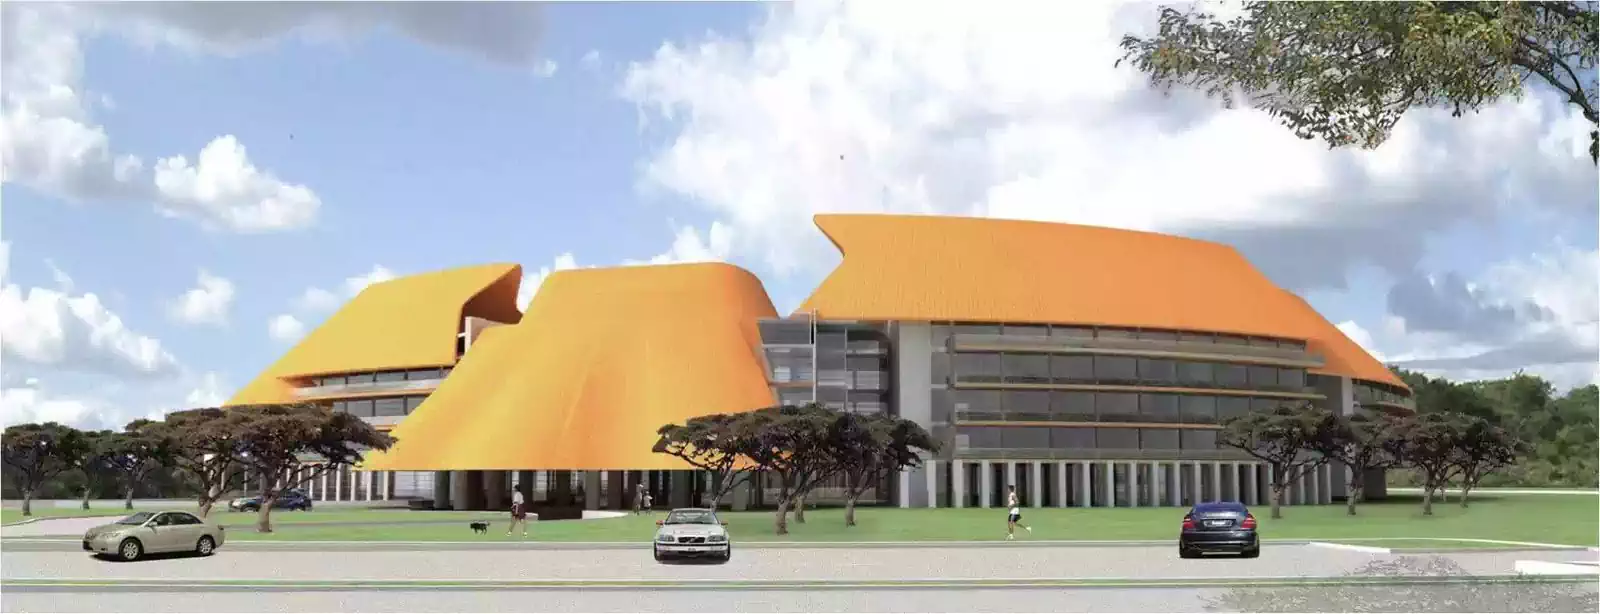 Circular thatched roof of airport hotel project 